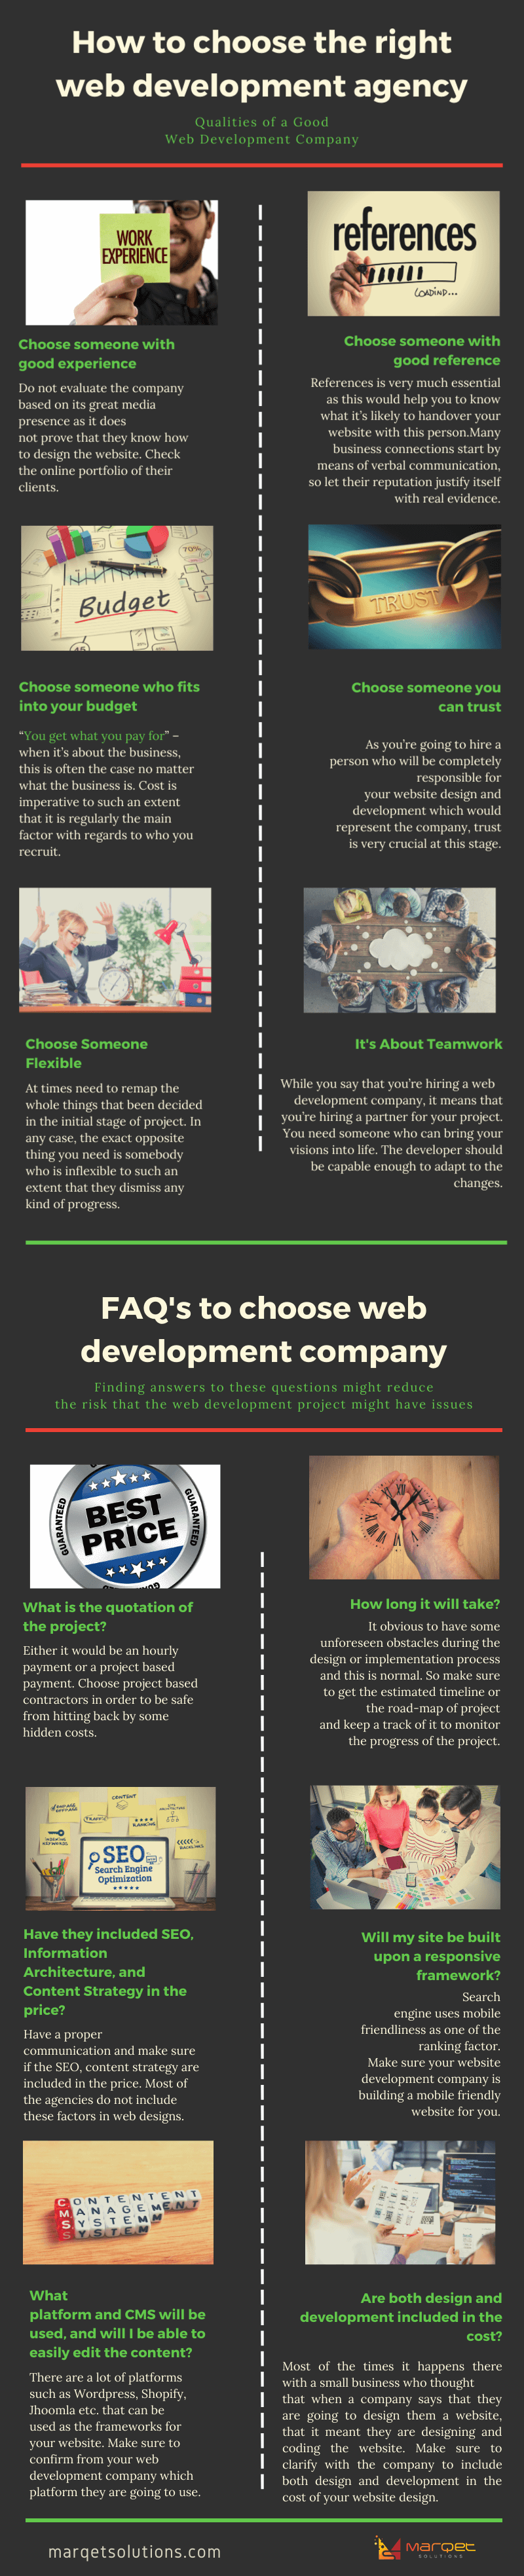 How to choose the right web development agency